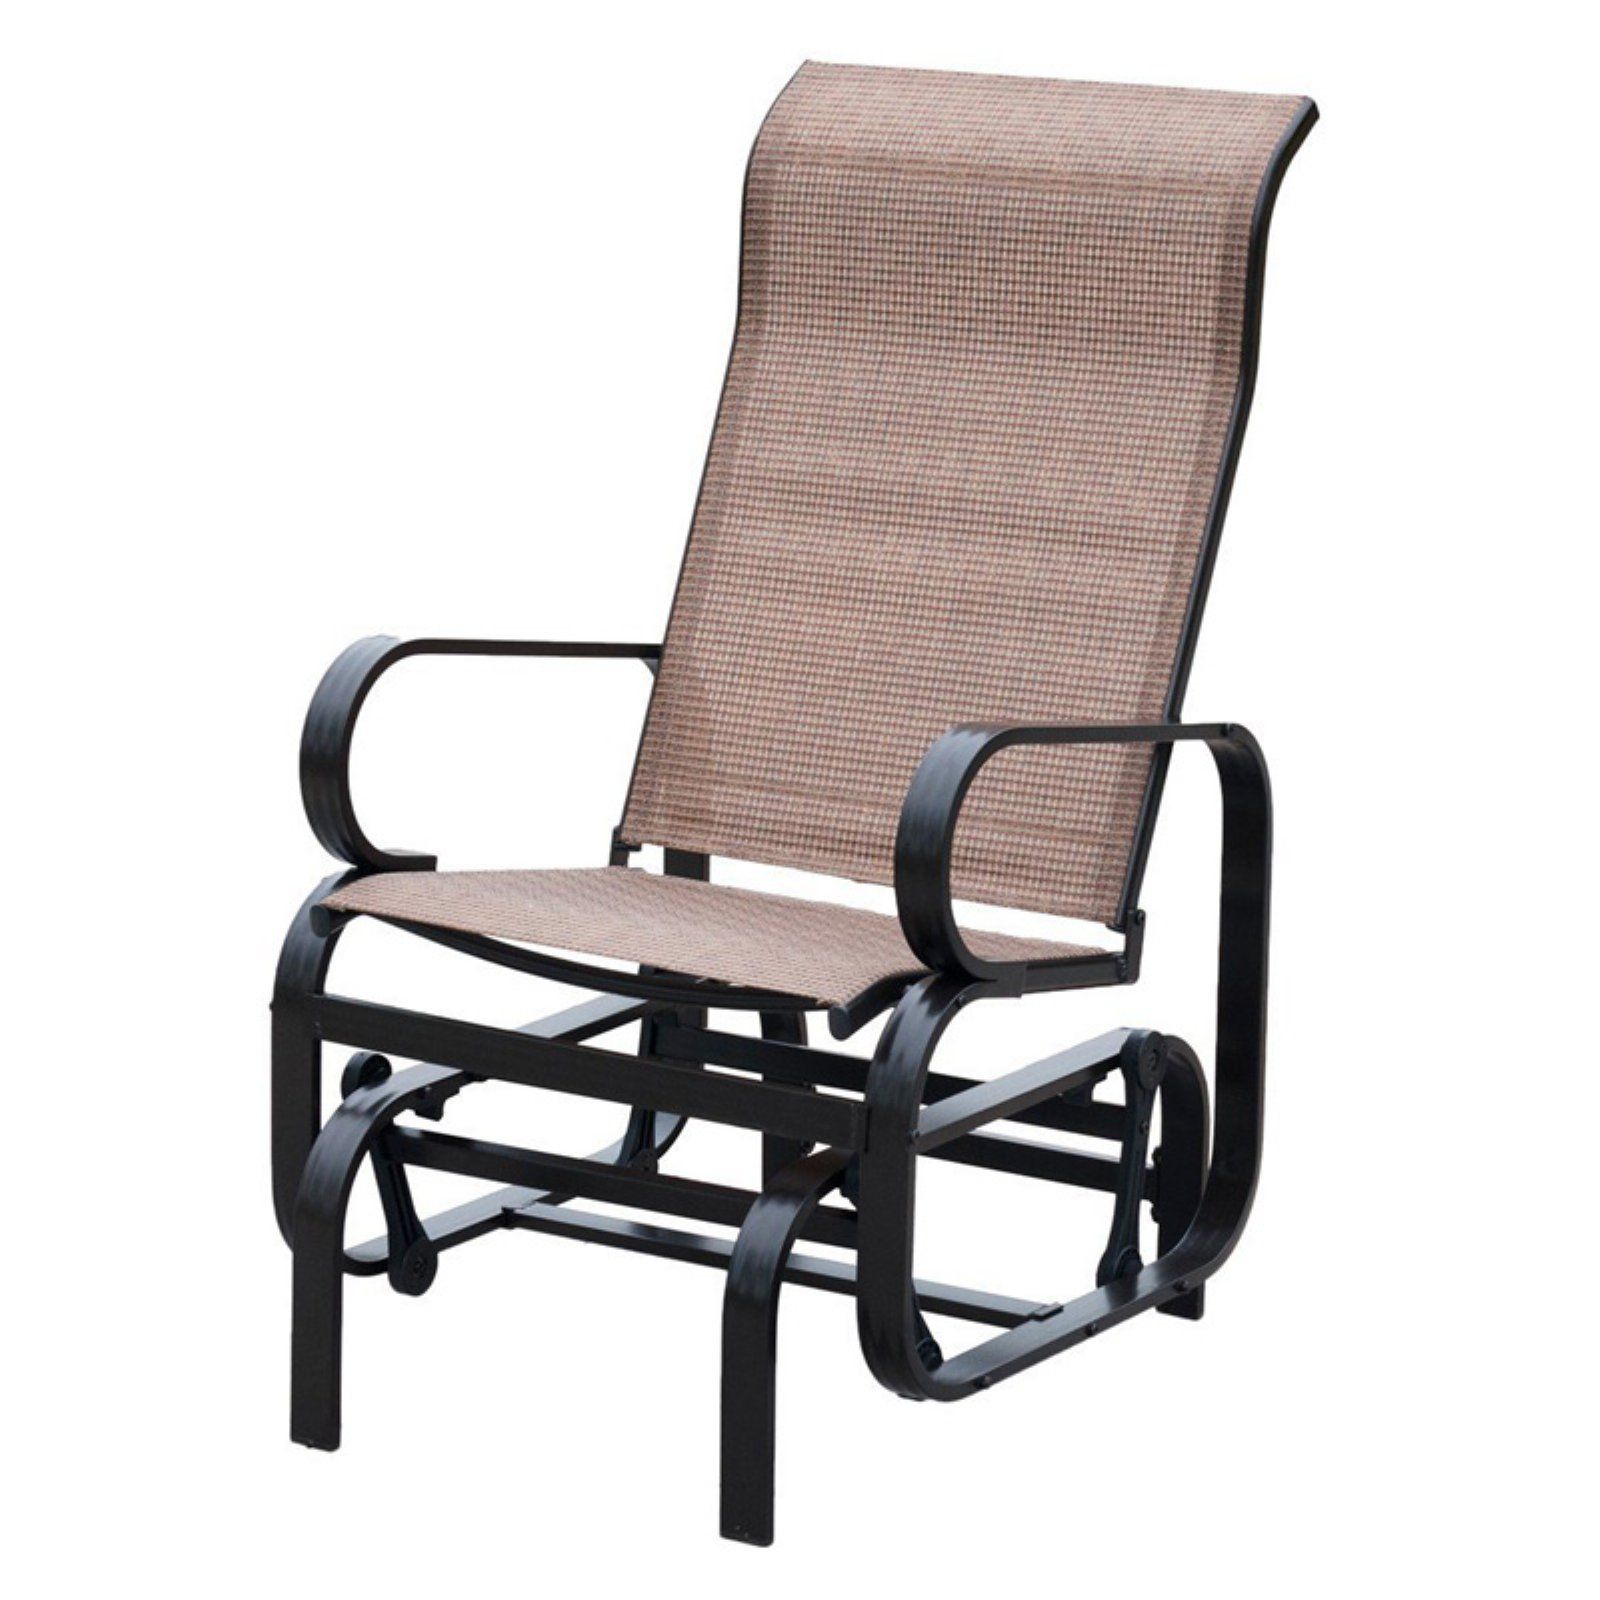 Chair Double Bates Crosley Swing Sofa Home Swivel Rocker With Outdoor Patio Swing Glider Bench Chair S (View 11 of 25)